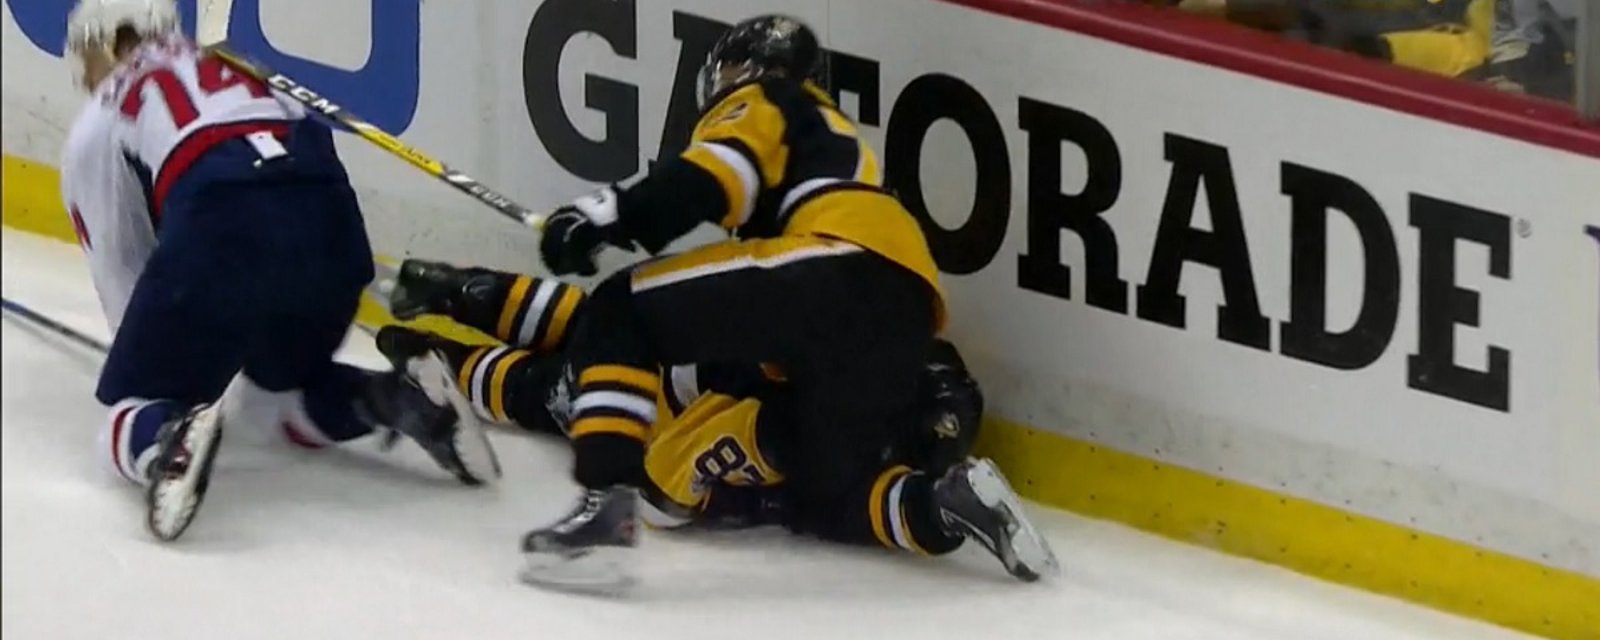 Breaking: Crosby goes head first into the boards after scary collision behind the net.